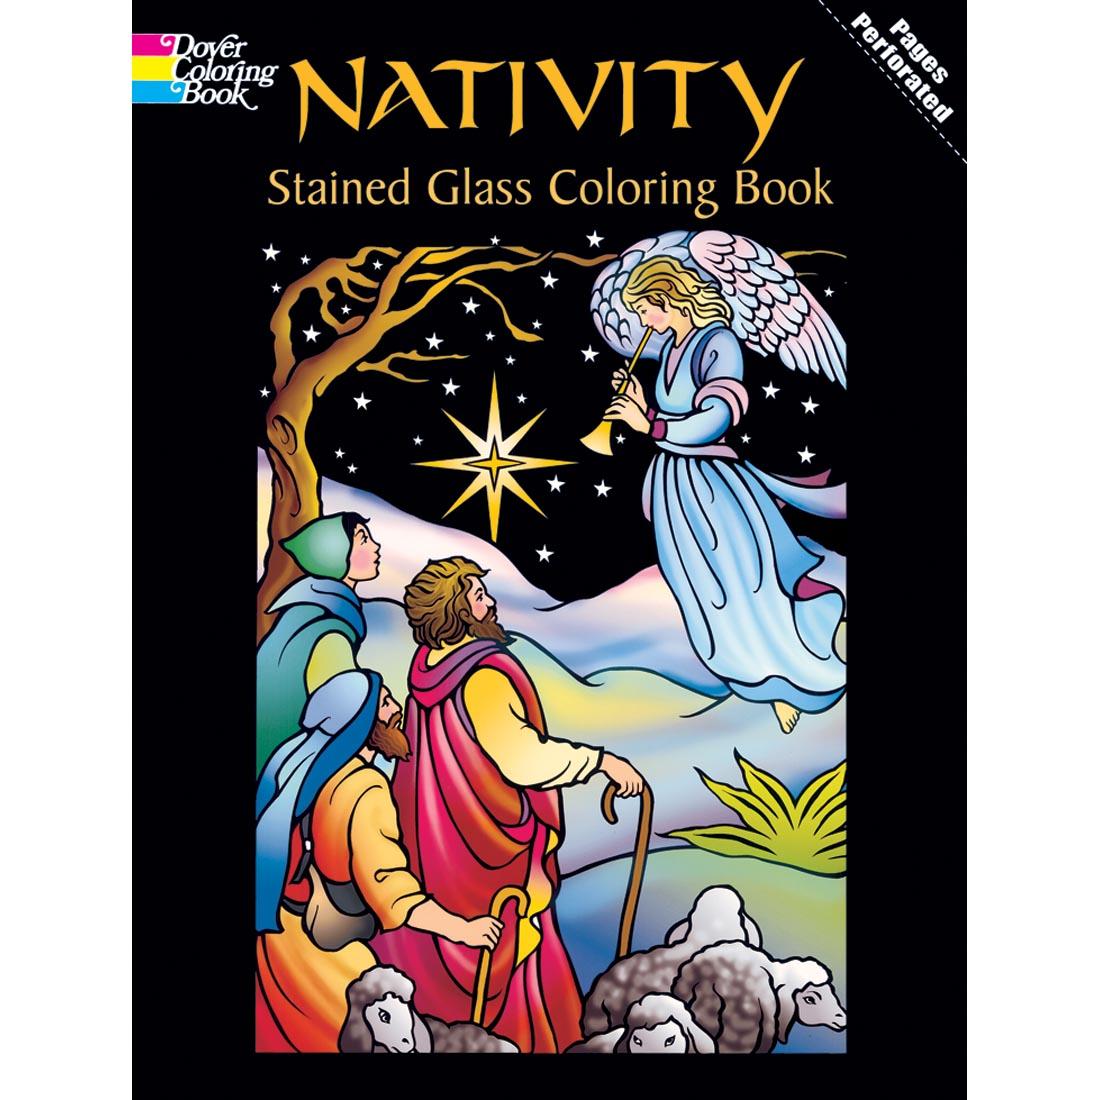 Nativity Stained Glass Coloring Book by Dover